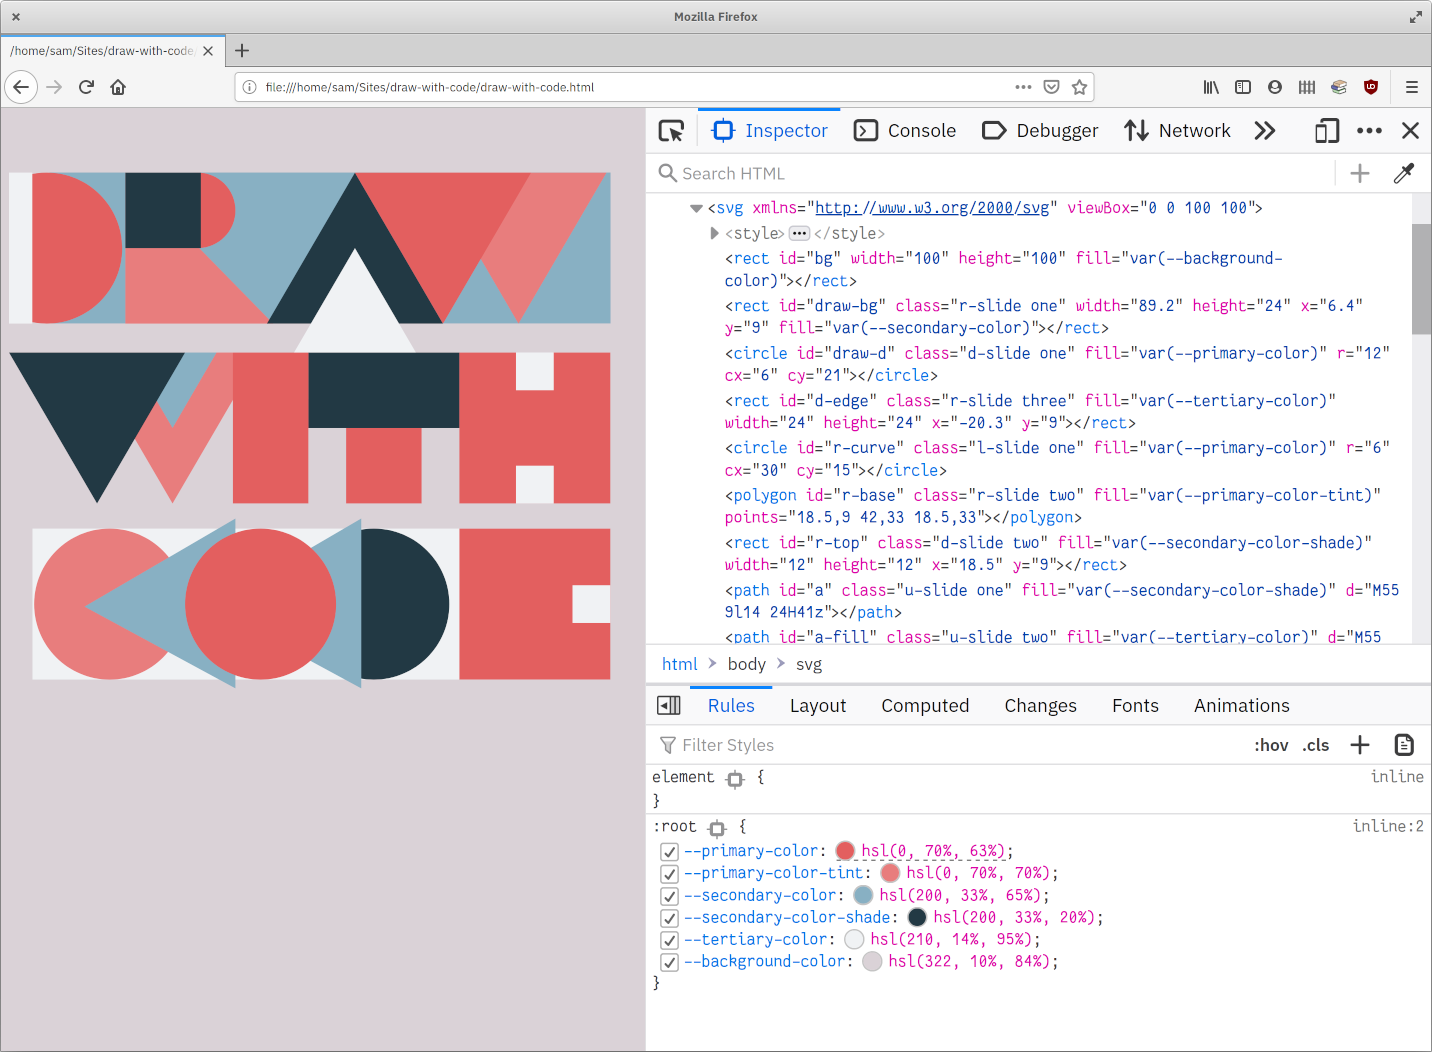 screenshot of the SVG being inspected in Firefox Dev Tools, revealing its source code